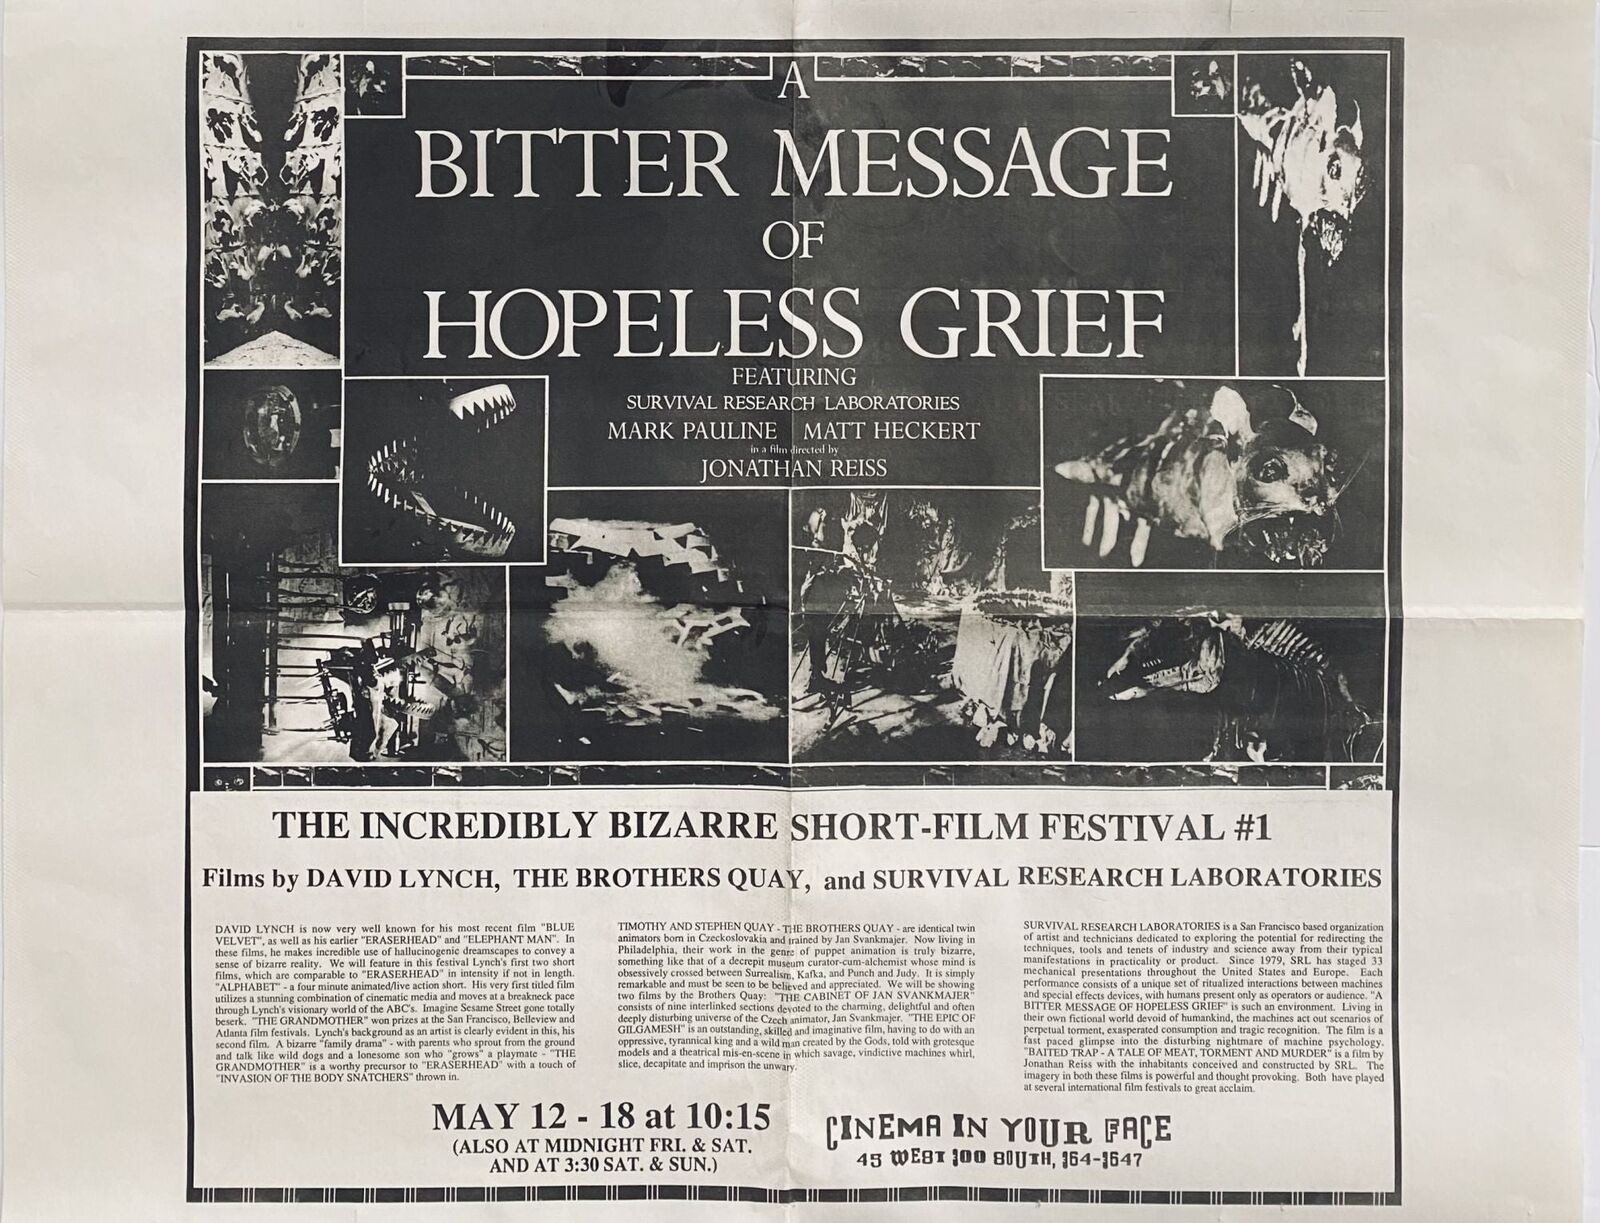 Survival Research Laboratories, David Lynch / Bitter Message of Hopeless Grief